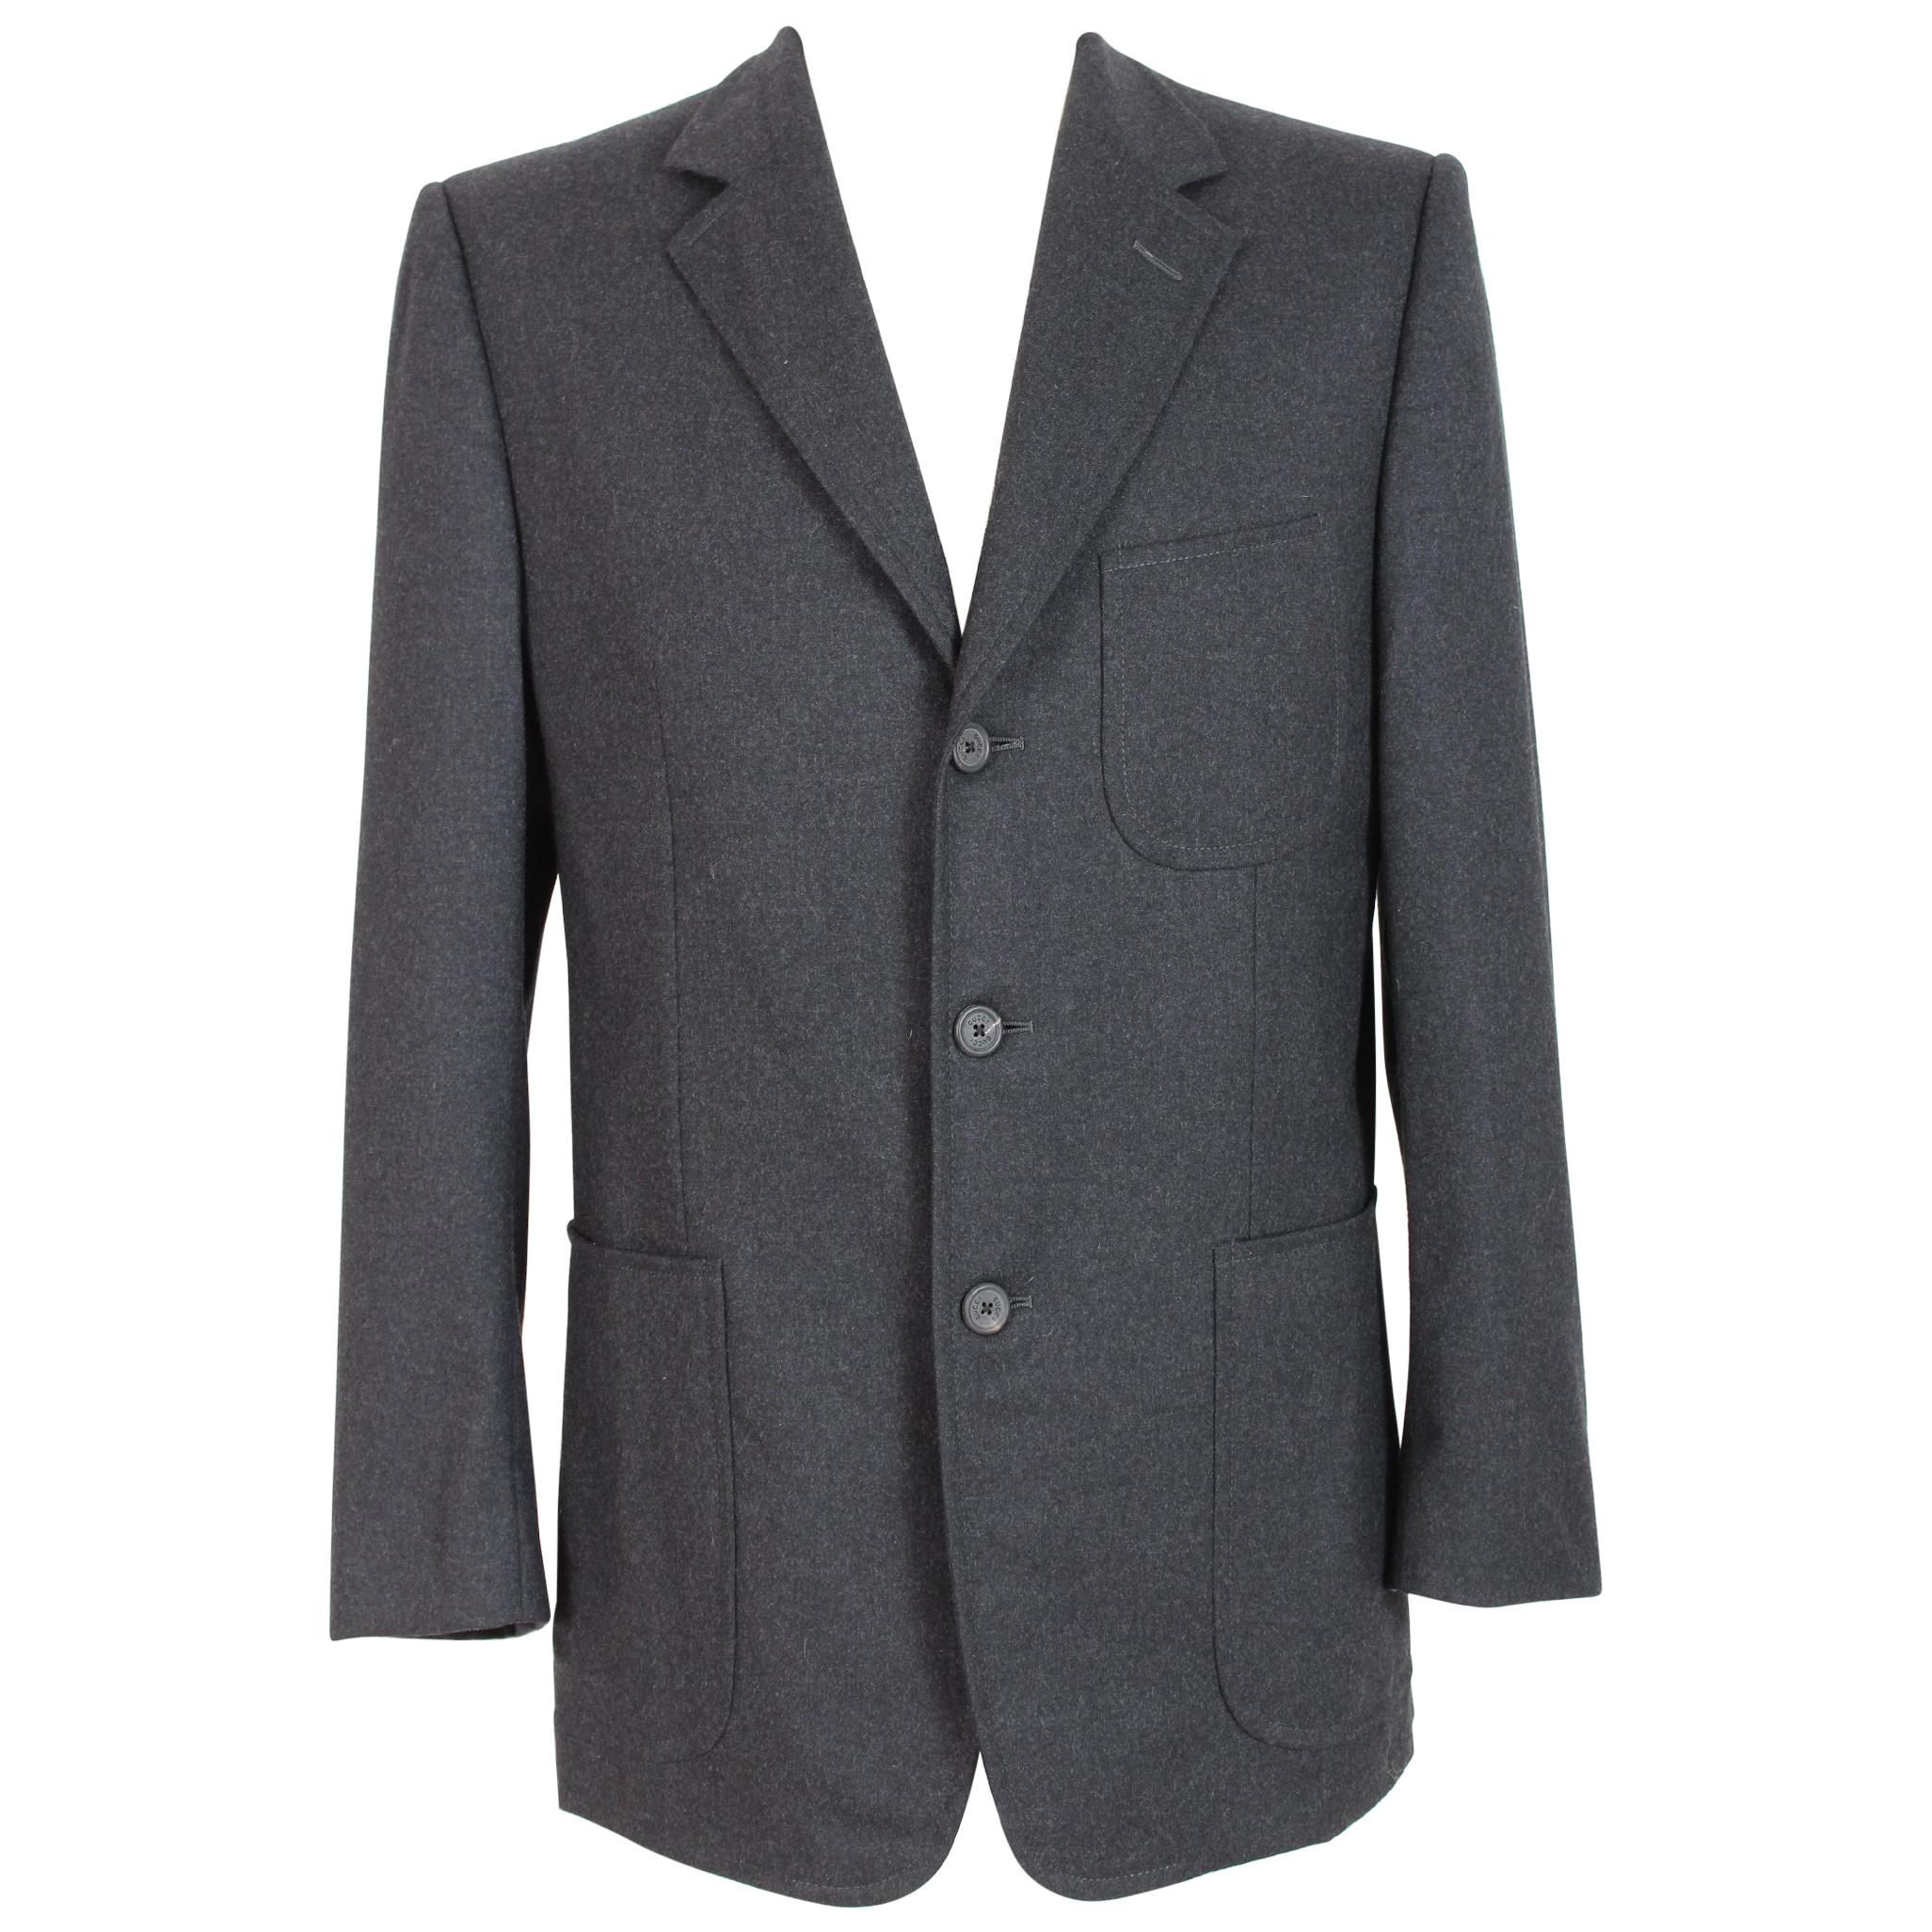 1990s Gucci Gray Boiled Wool Three Button Slim Fit Suit Jacket